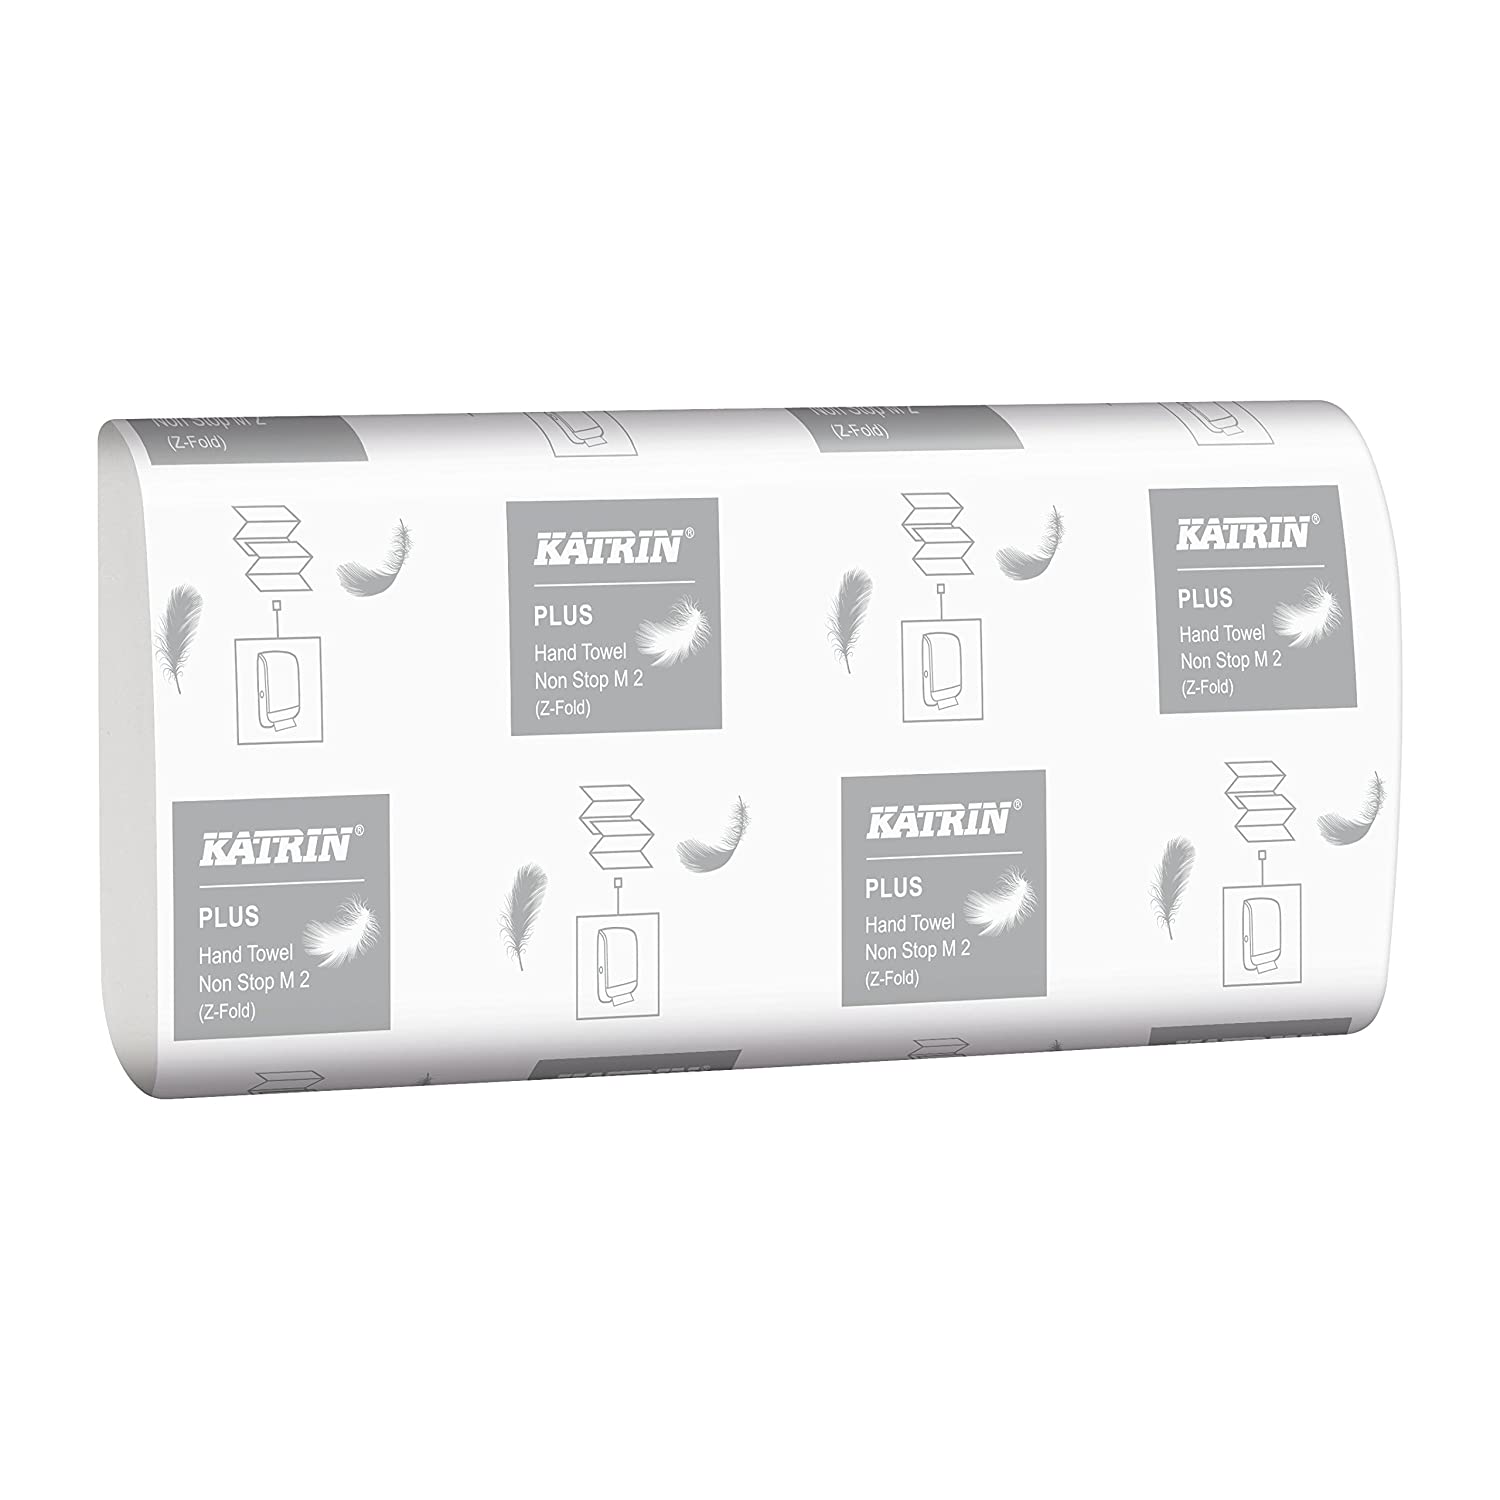 Katrin Plus 2Ply One-Stop M2 - Case of 2025 - 343146 - 343146